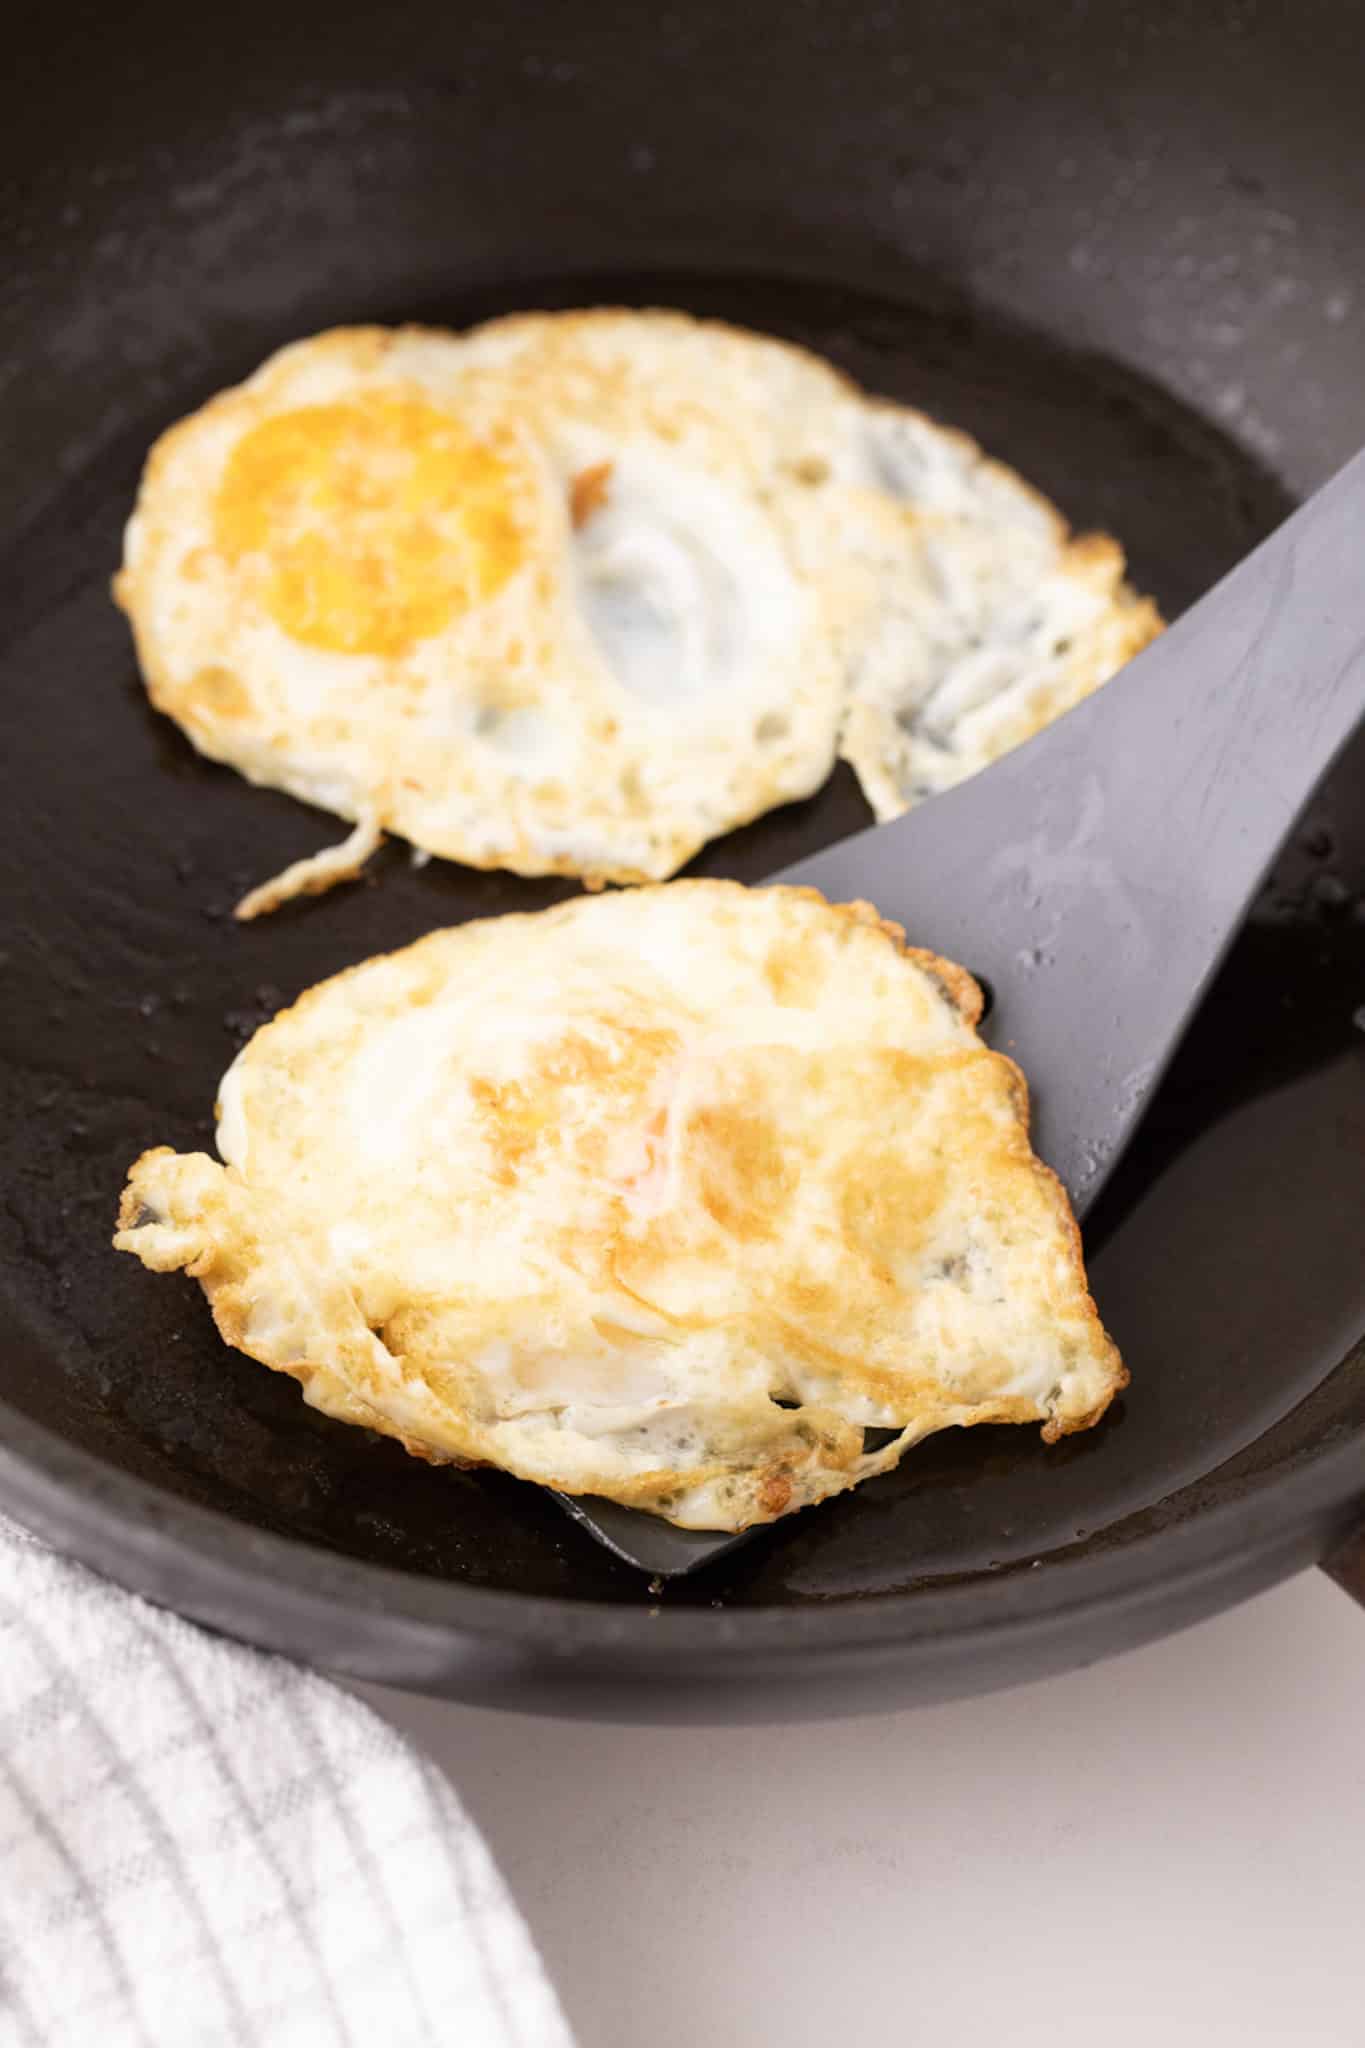 https://www.cleaneatingkitchen.com/wp-content/uploads/2021/04/flipping-over-medium-eggs-scaled.jpg